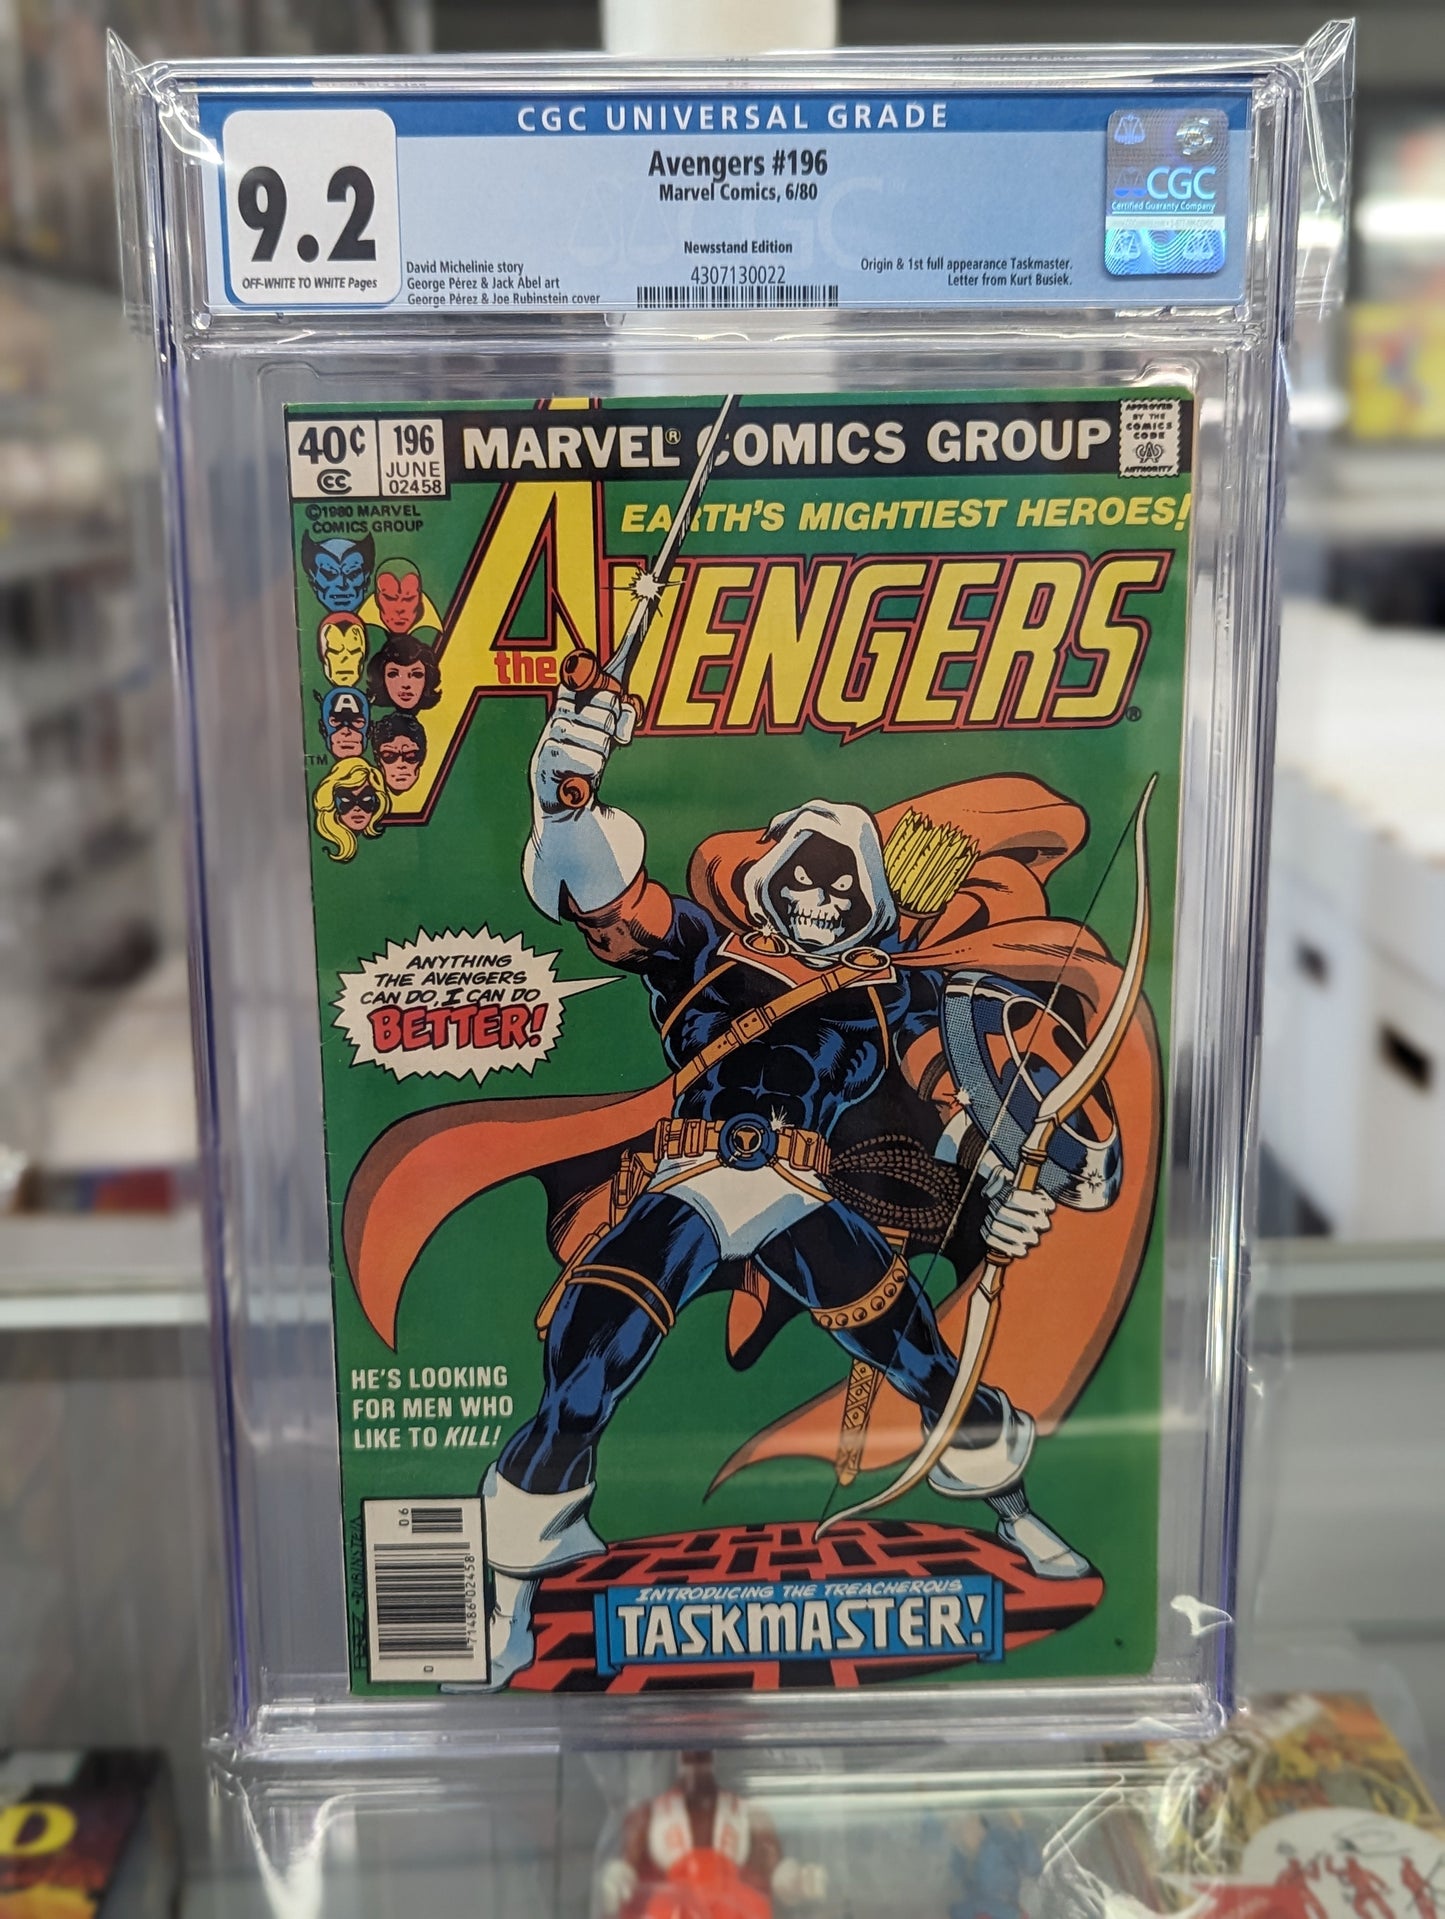 Avengers #196 Newsttand CGC 9.2 (1st Appearance of Taskmaster) - Covert Comics and Collectibles